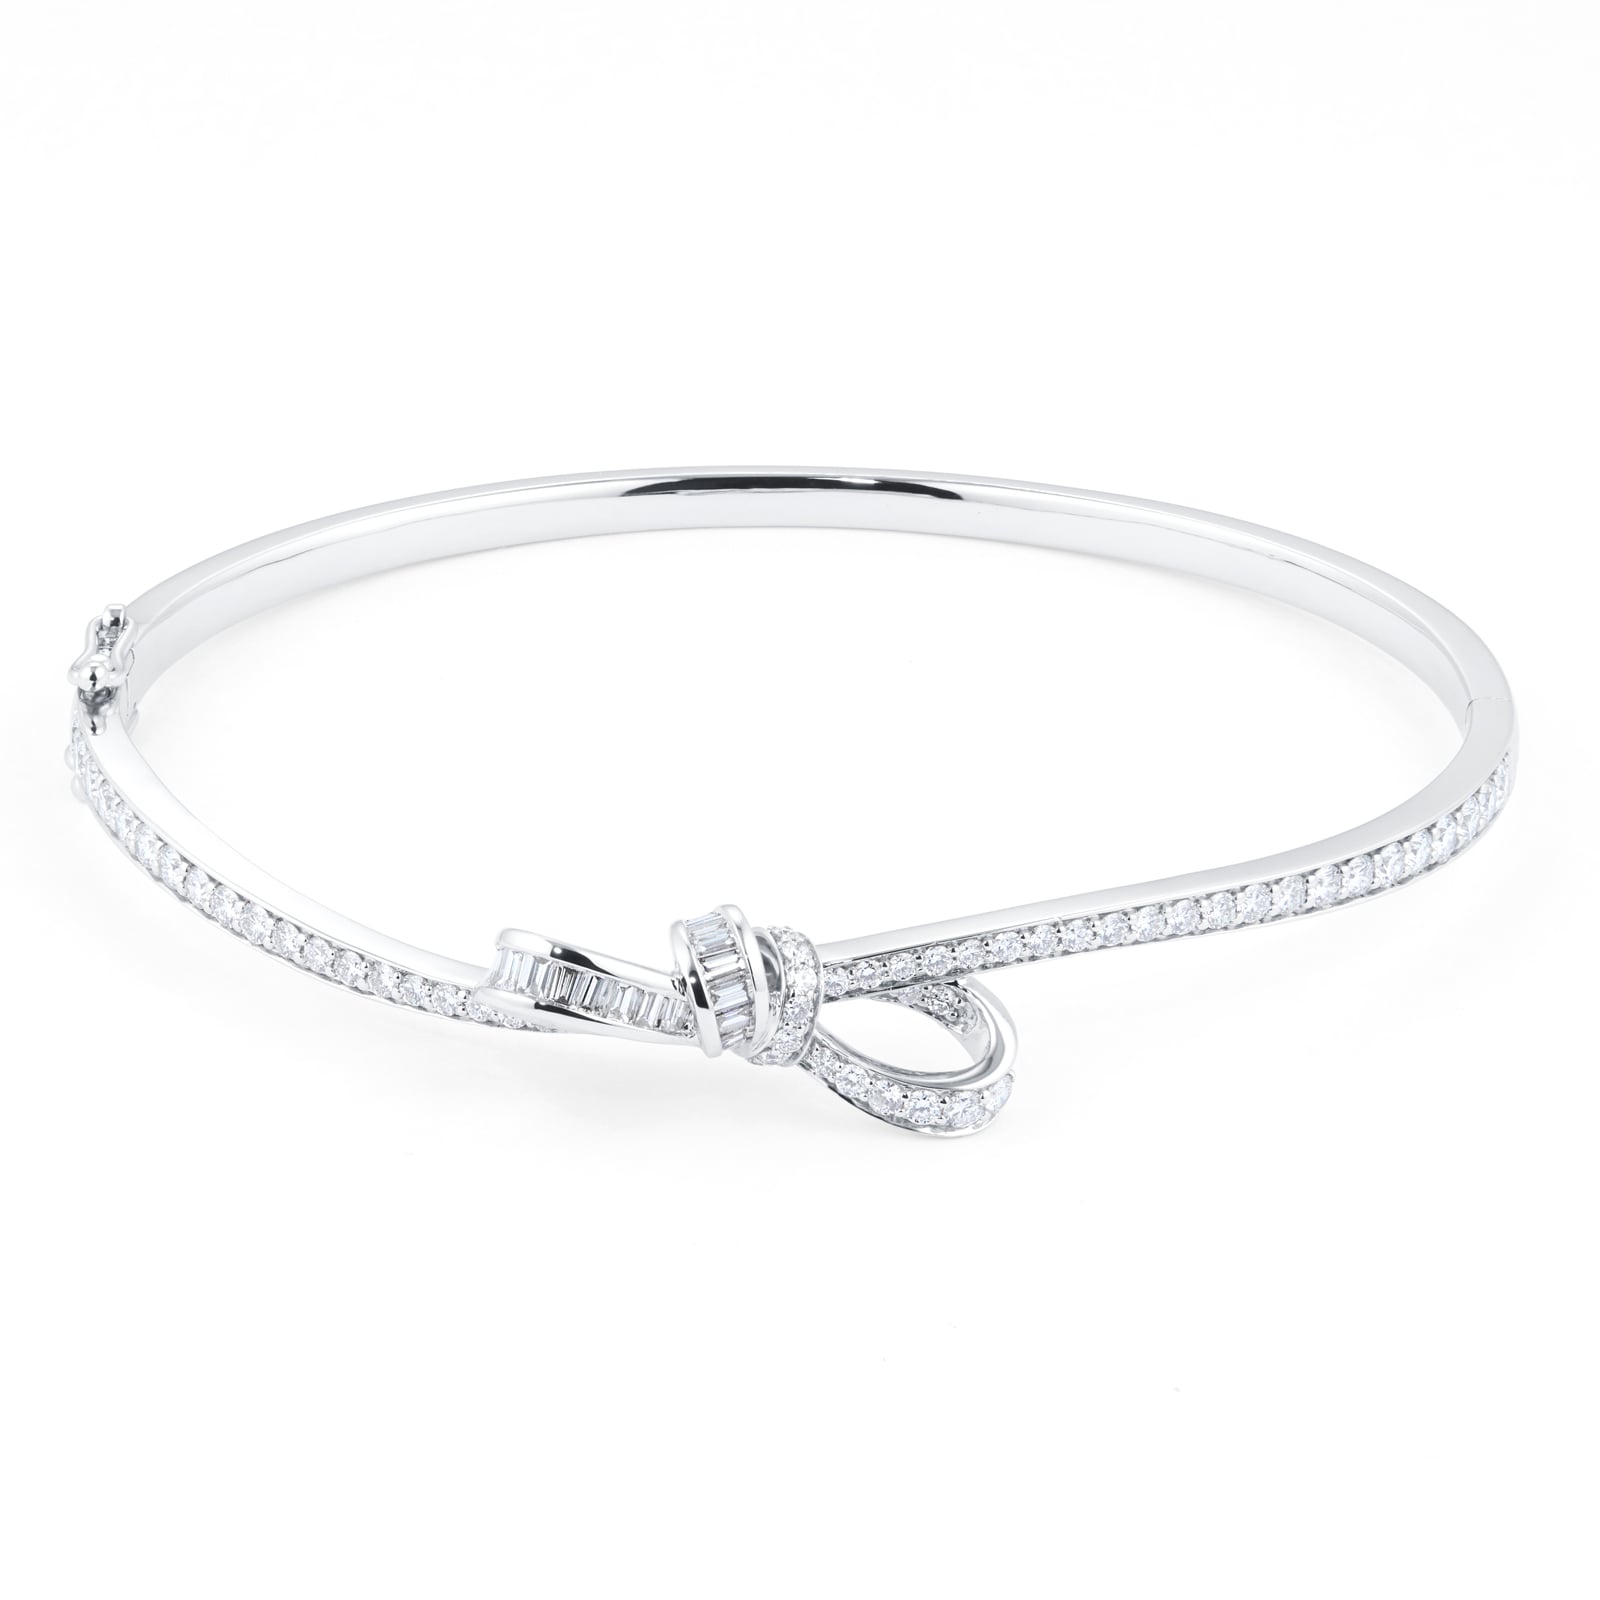 Limited Edition Renee 18ct White Gold 1.50cttw Ribbon Bangle